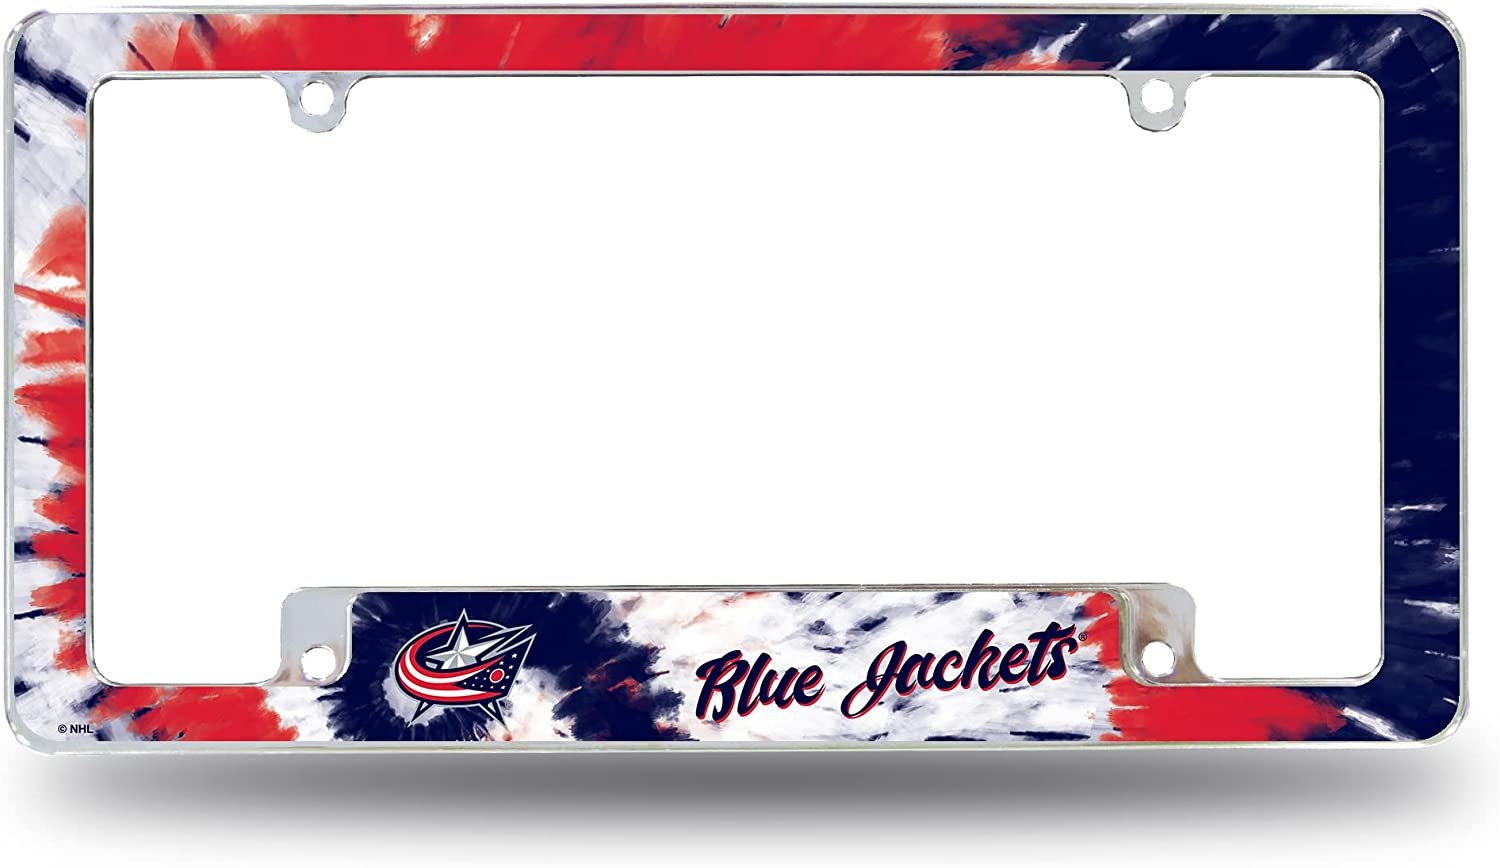 Columbus Blue Jackets Metal License Plate Frame Chrome Tag Cover Tie Dye Design 6x12 Inch